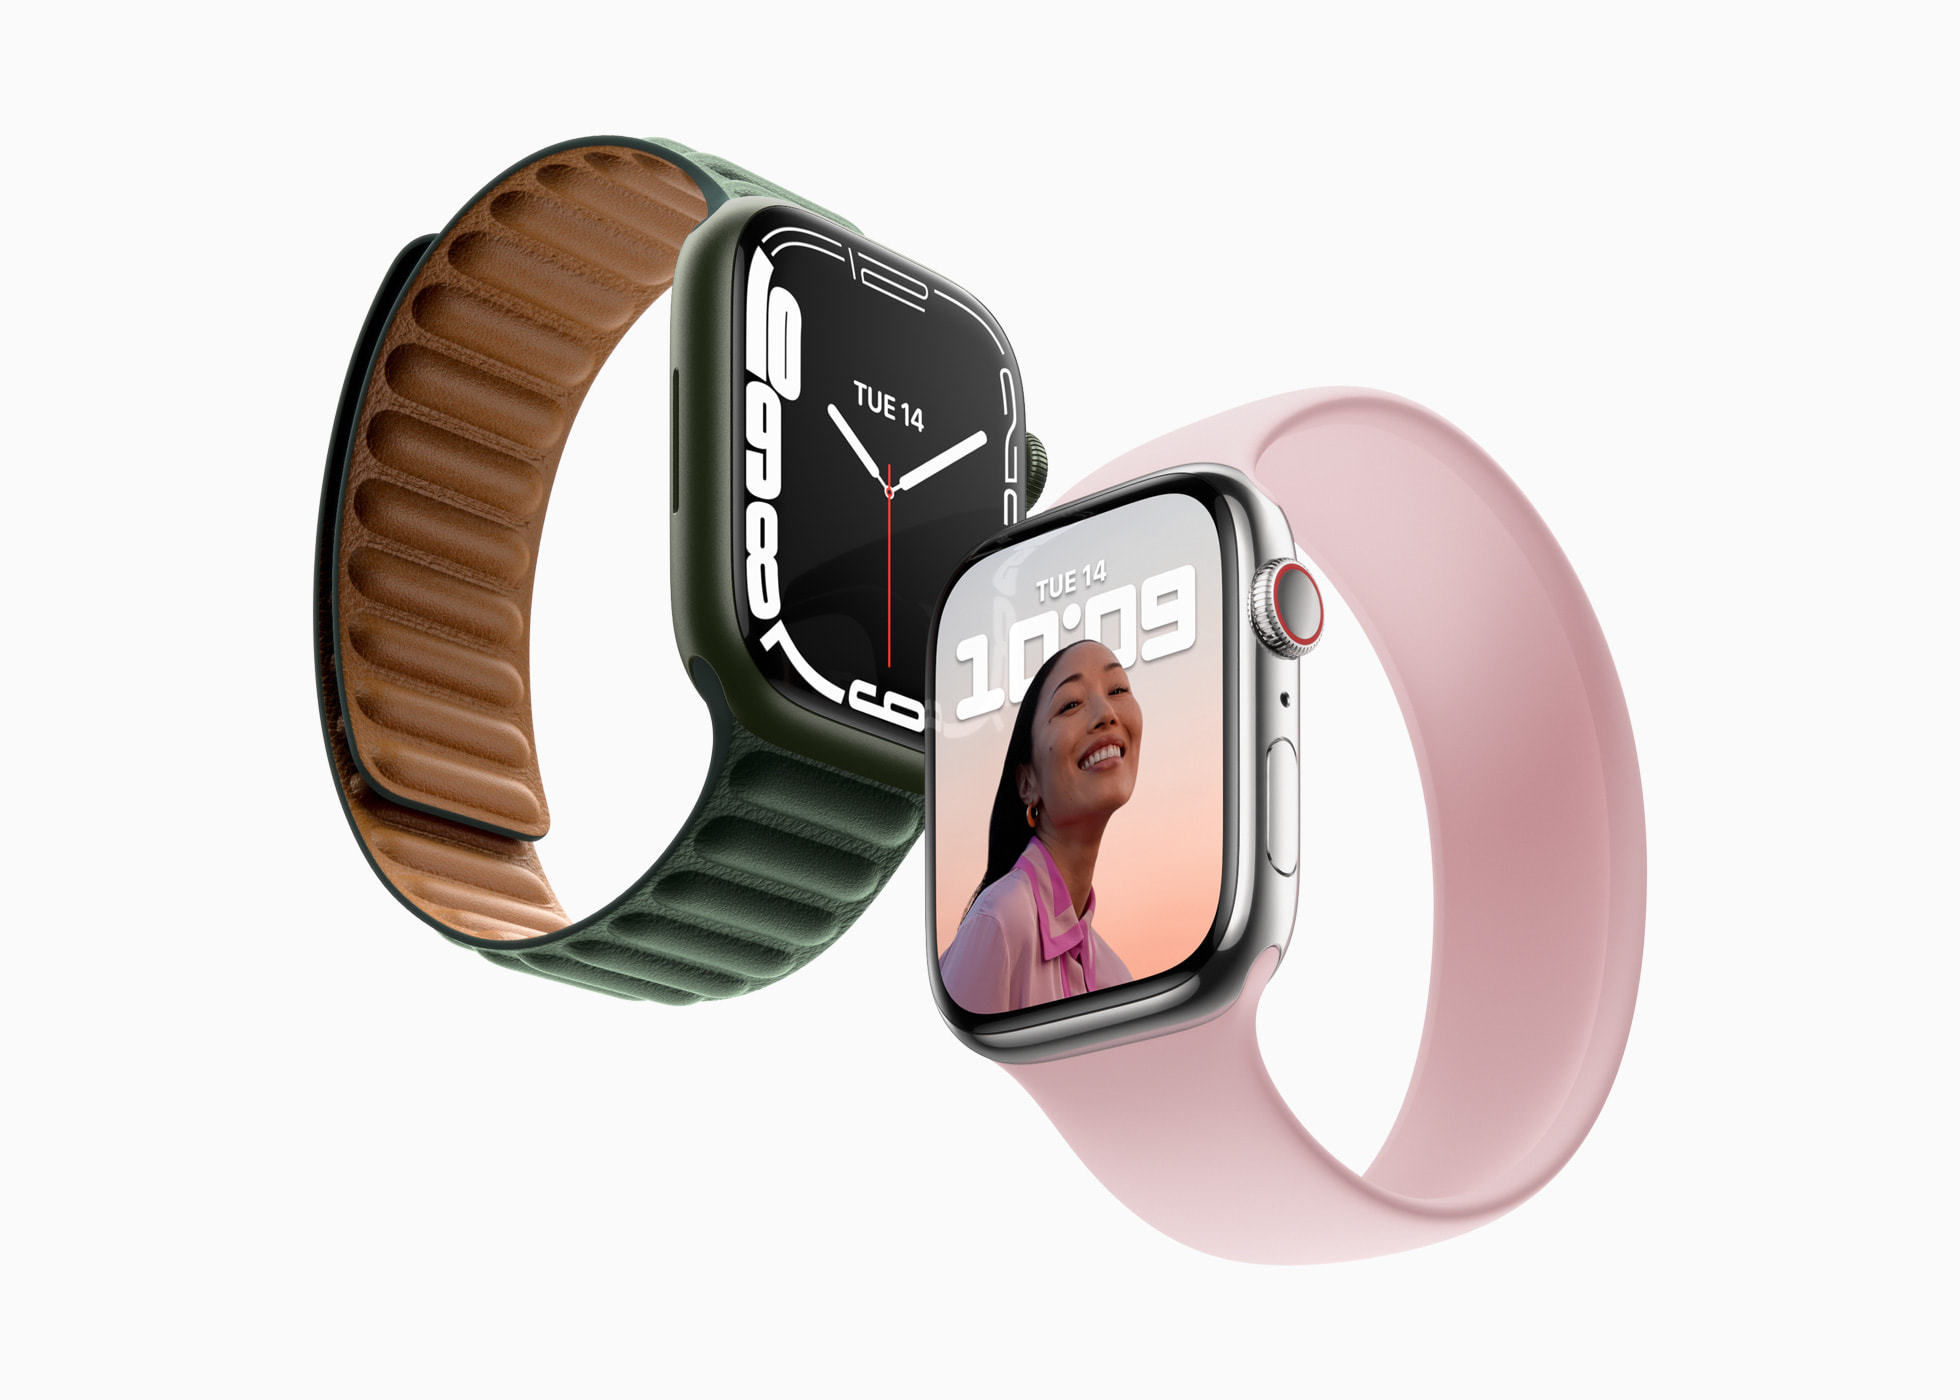 Apple reveals Apple Watch Series 7, featuring a larger, more advanced display 